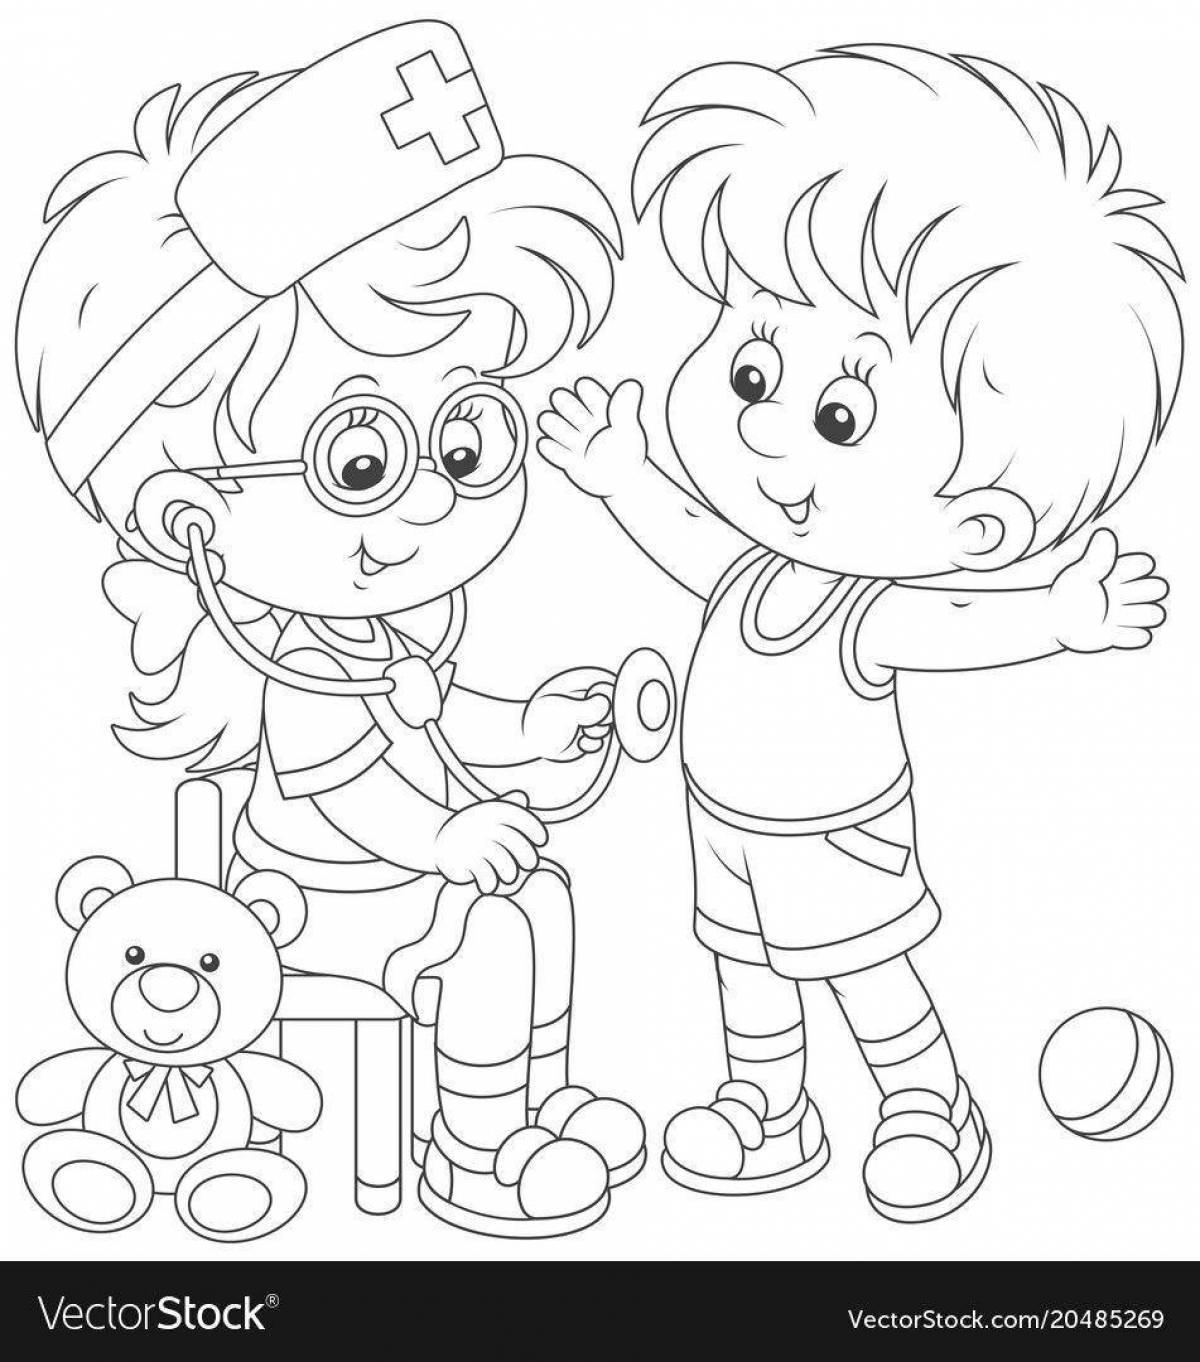 Color-explosive coloring page for children's rights